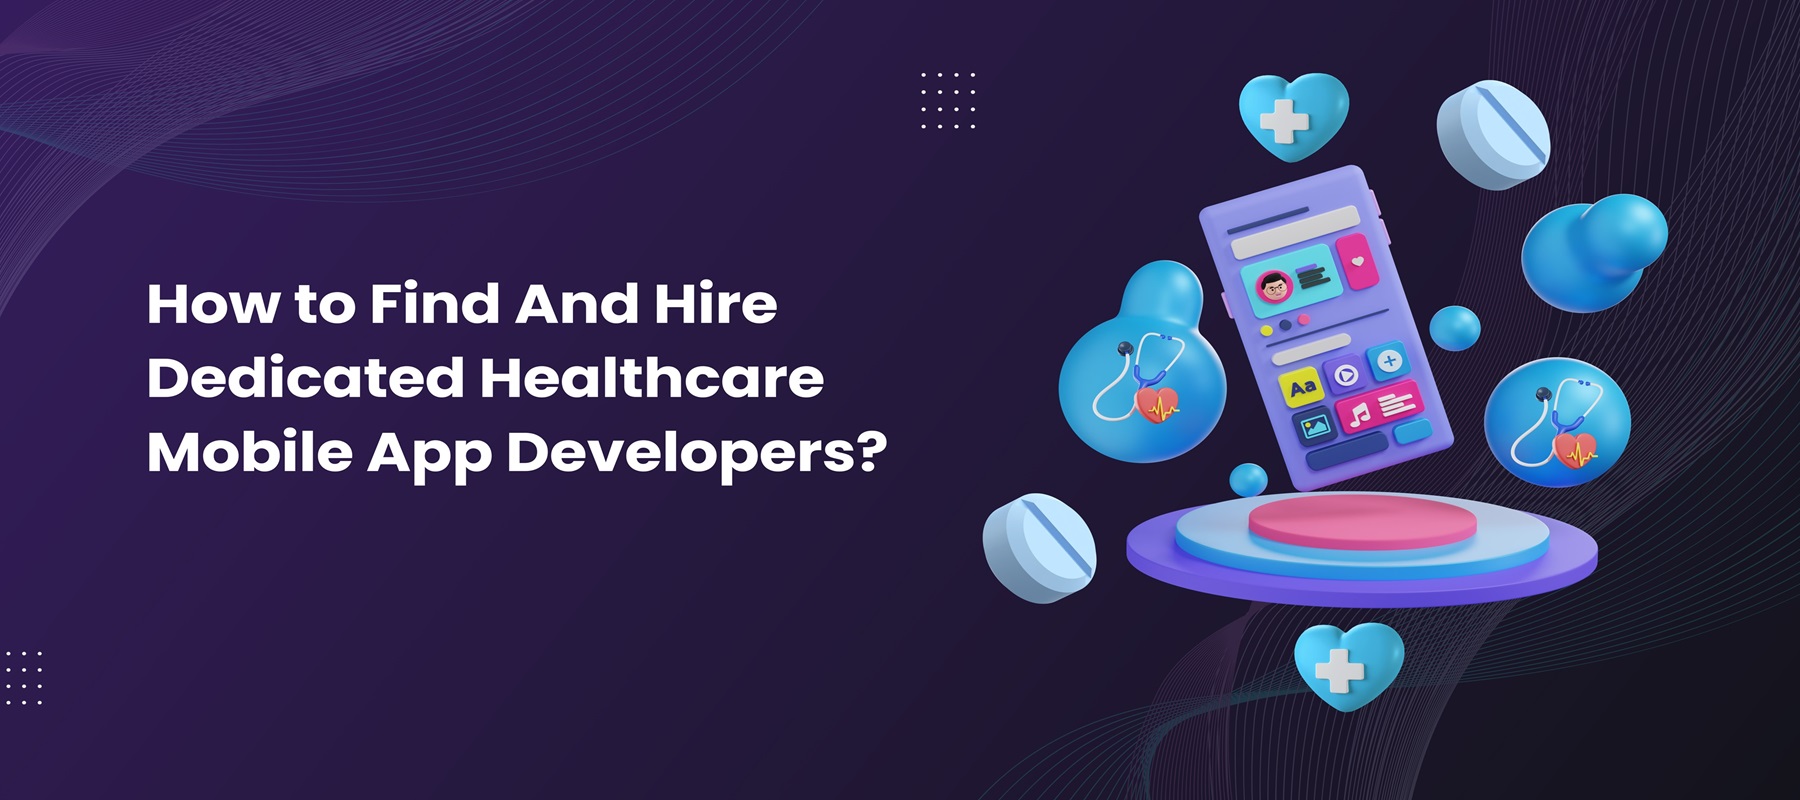 How to Hire Dedicated Healthcare Mobile App Developers